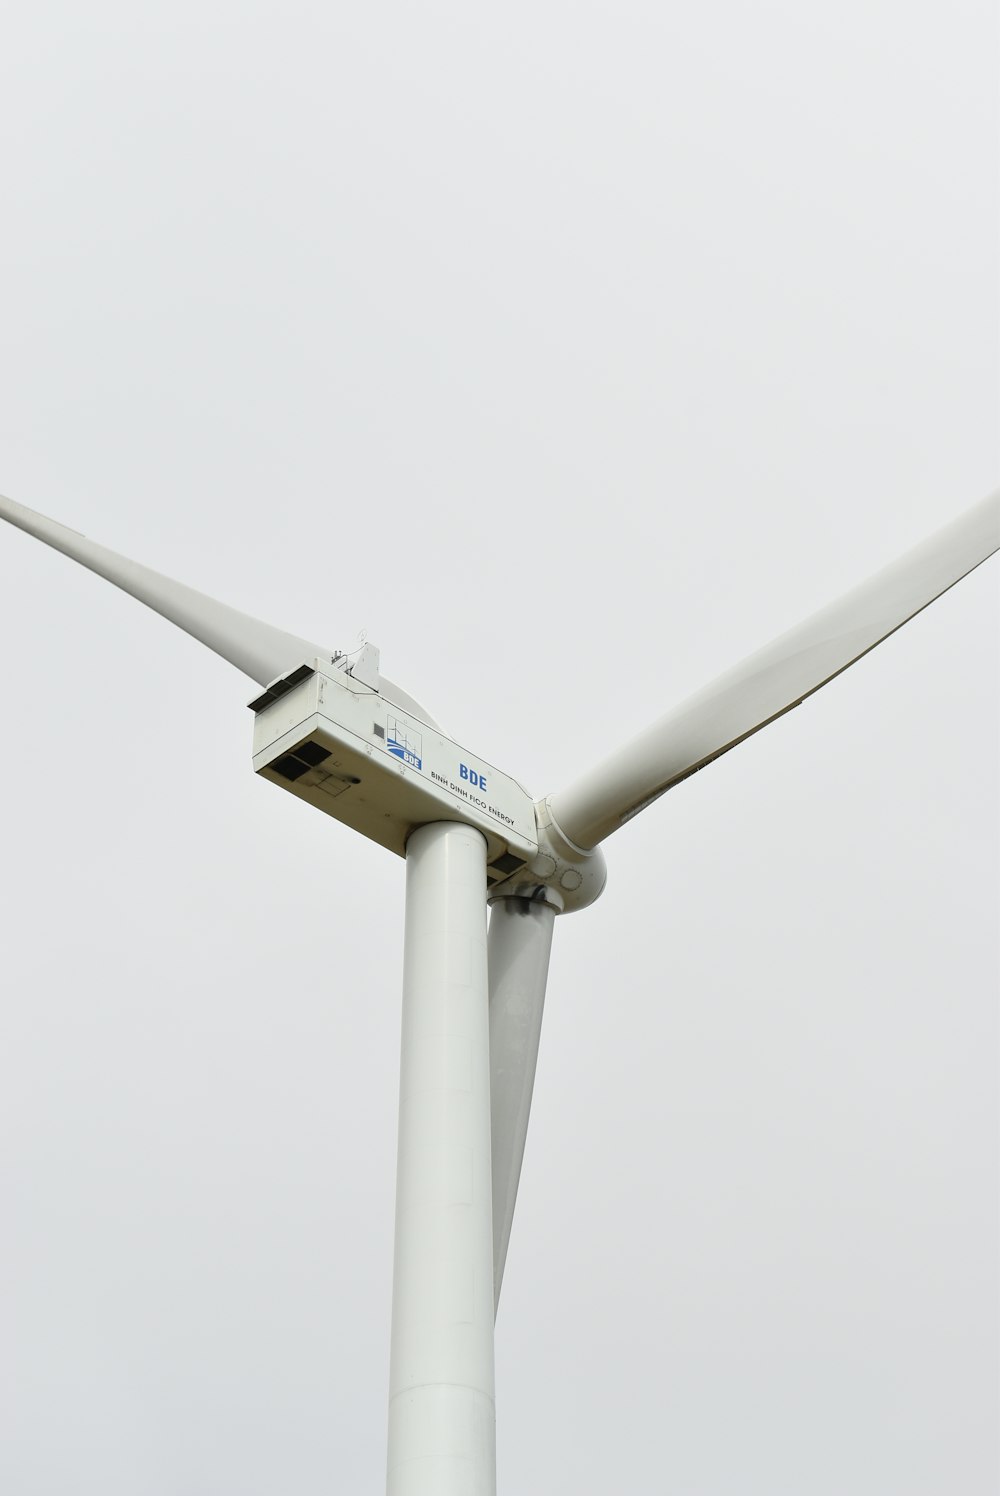 a close up of a wind turbine on a cloudy day